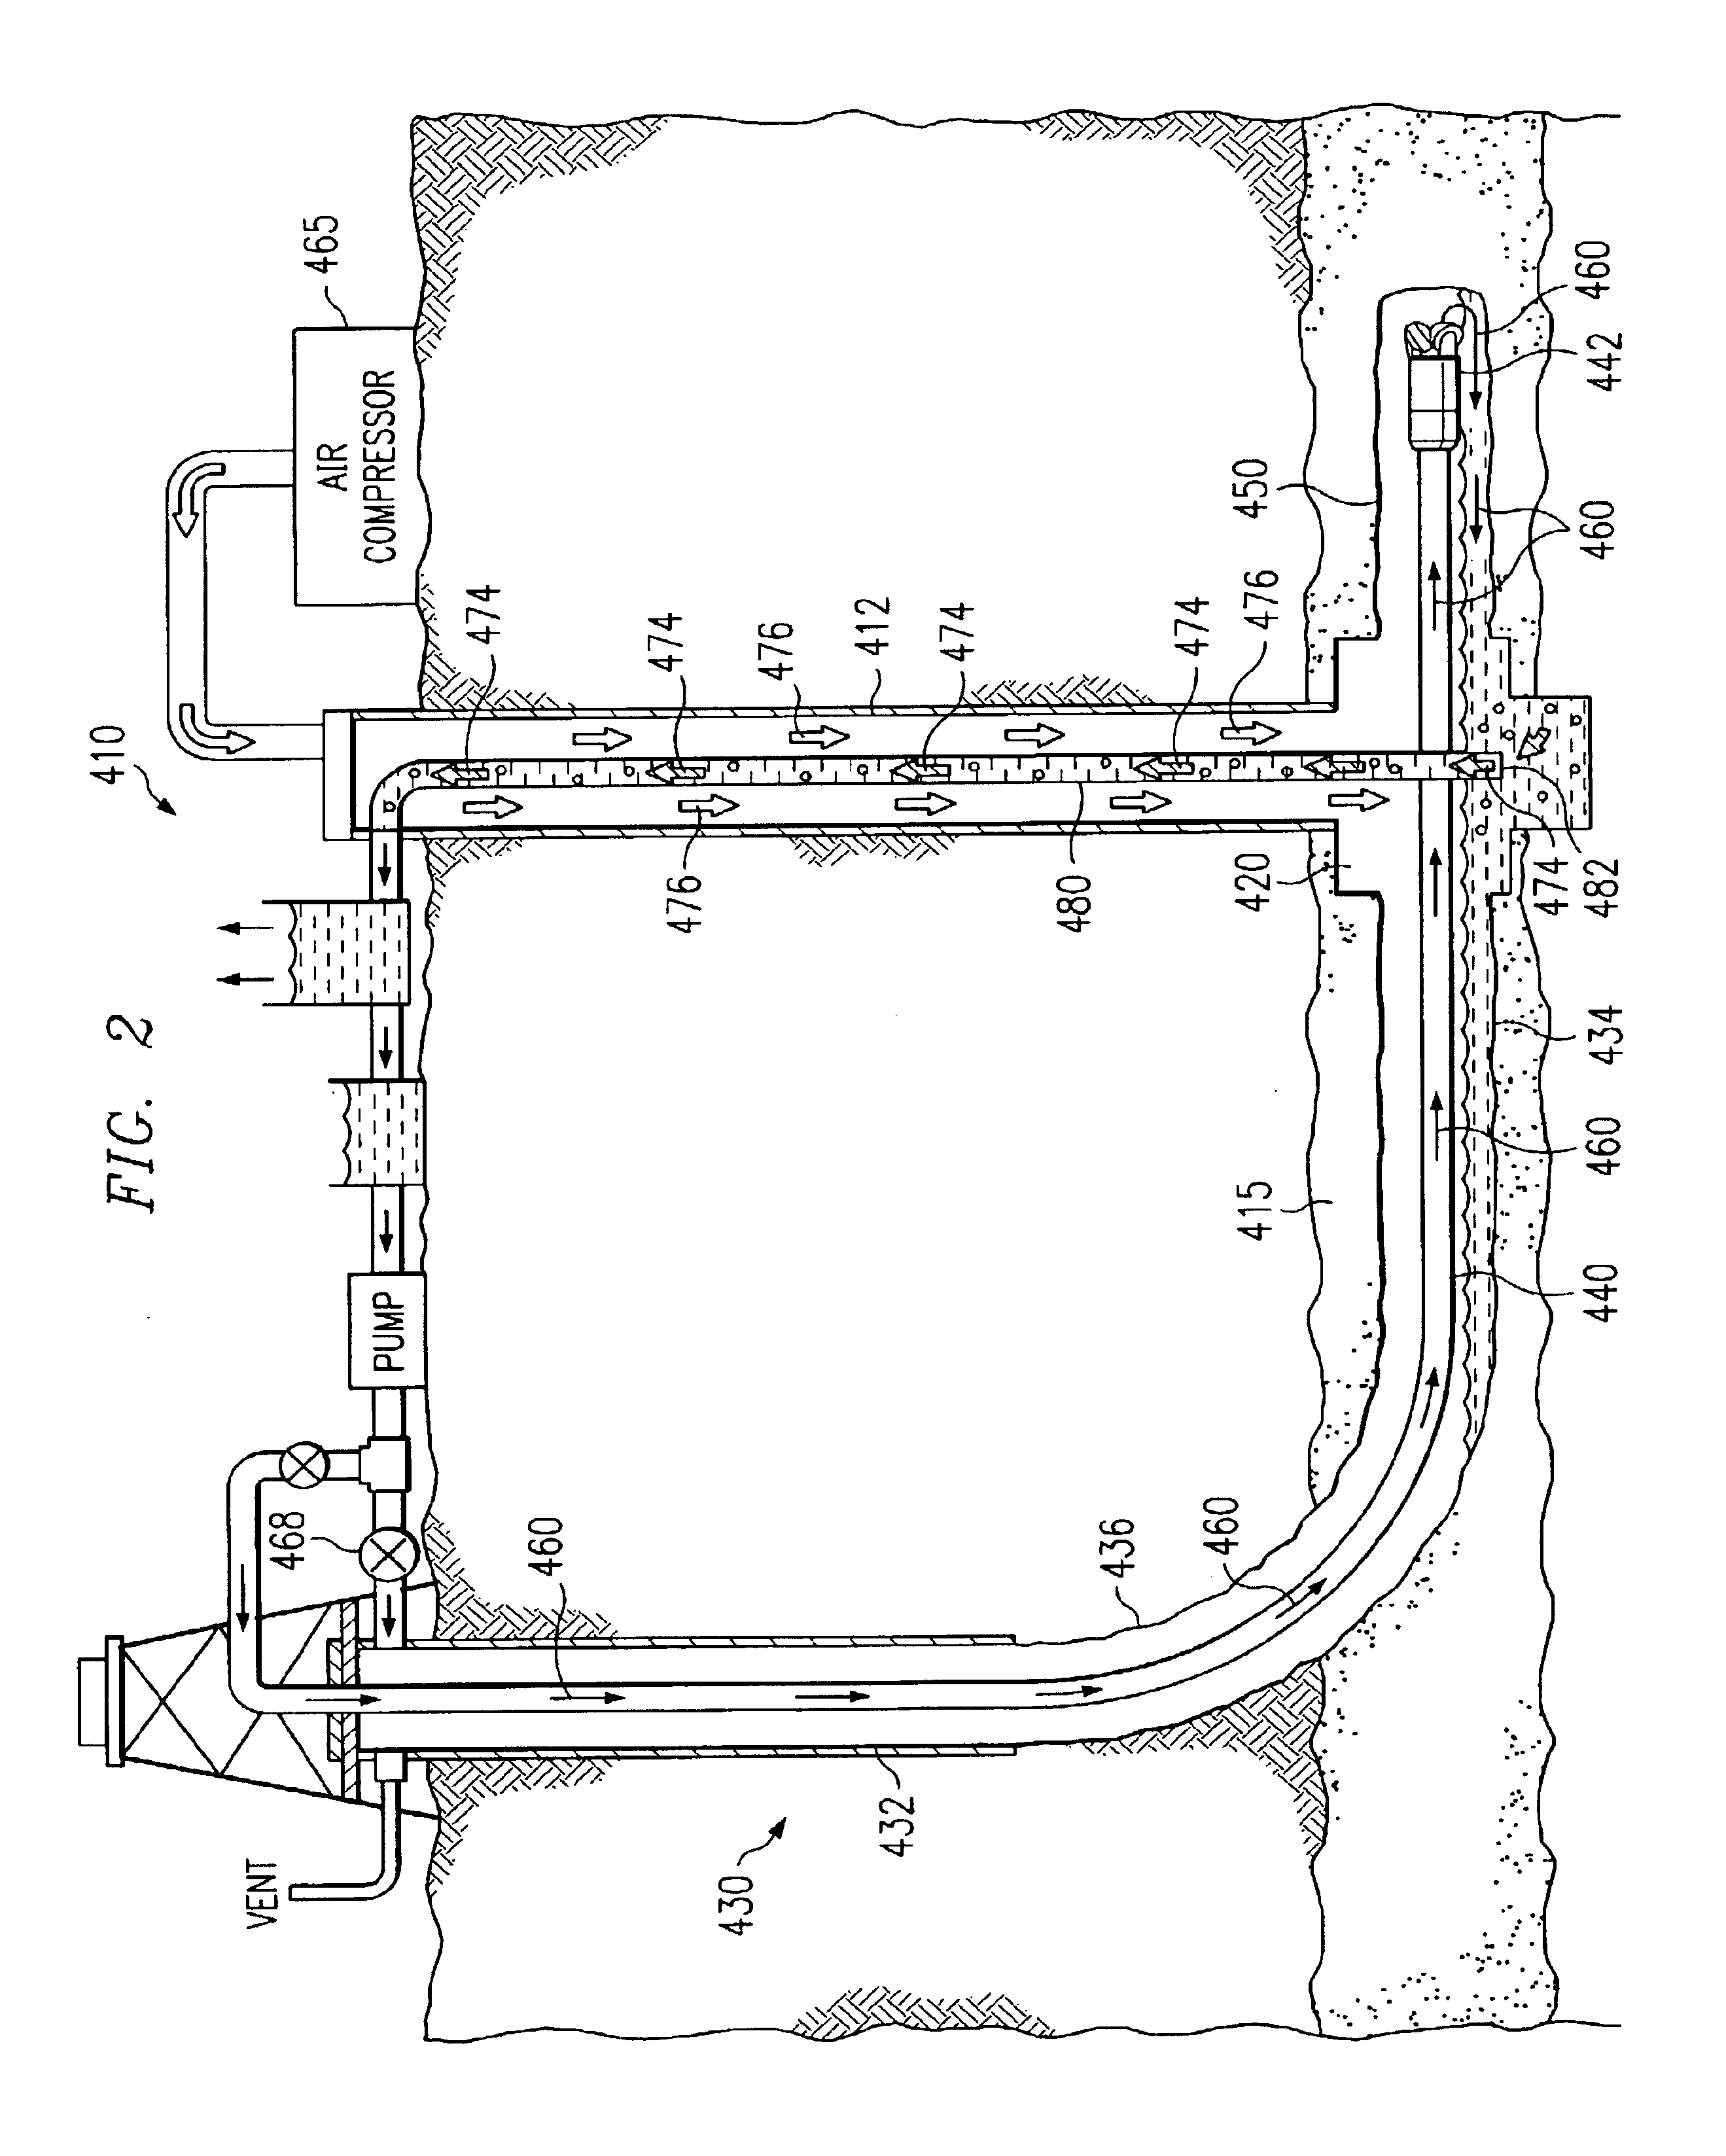 Method and system for circulating fluid in a well system